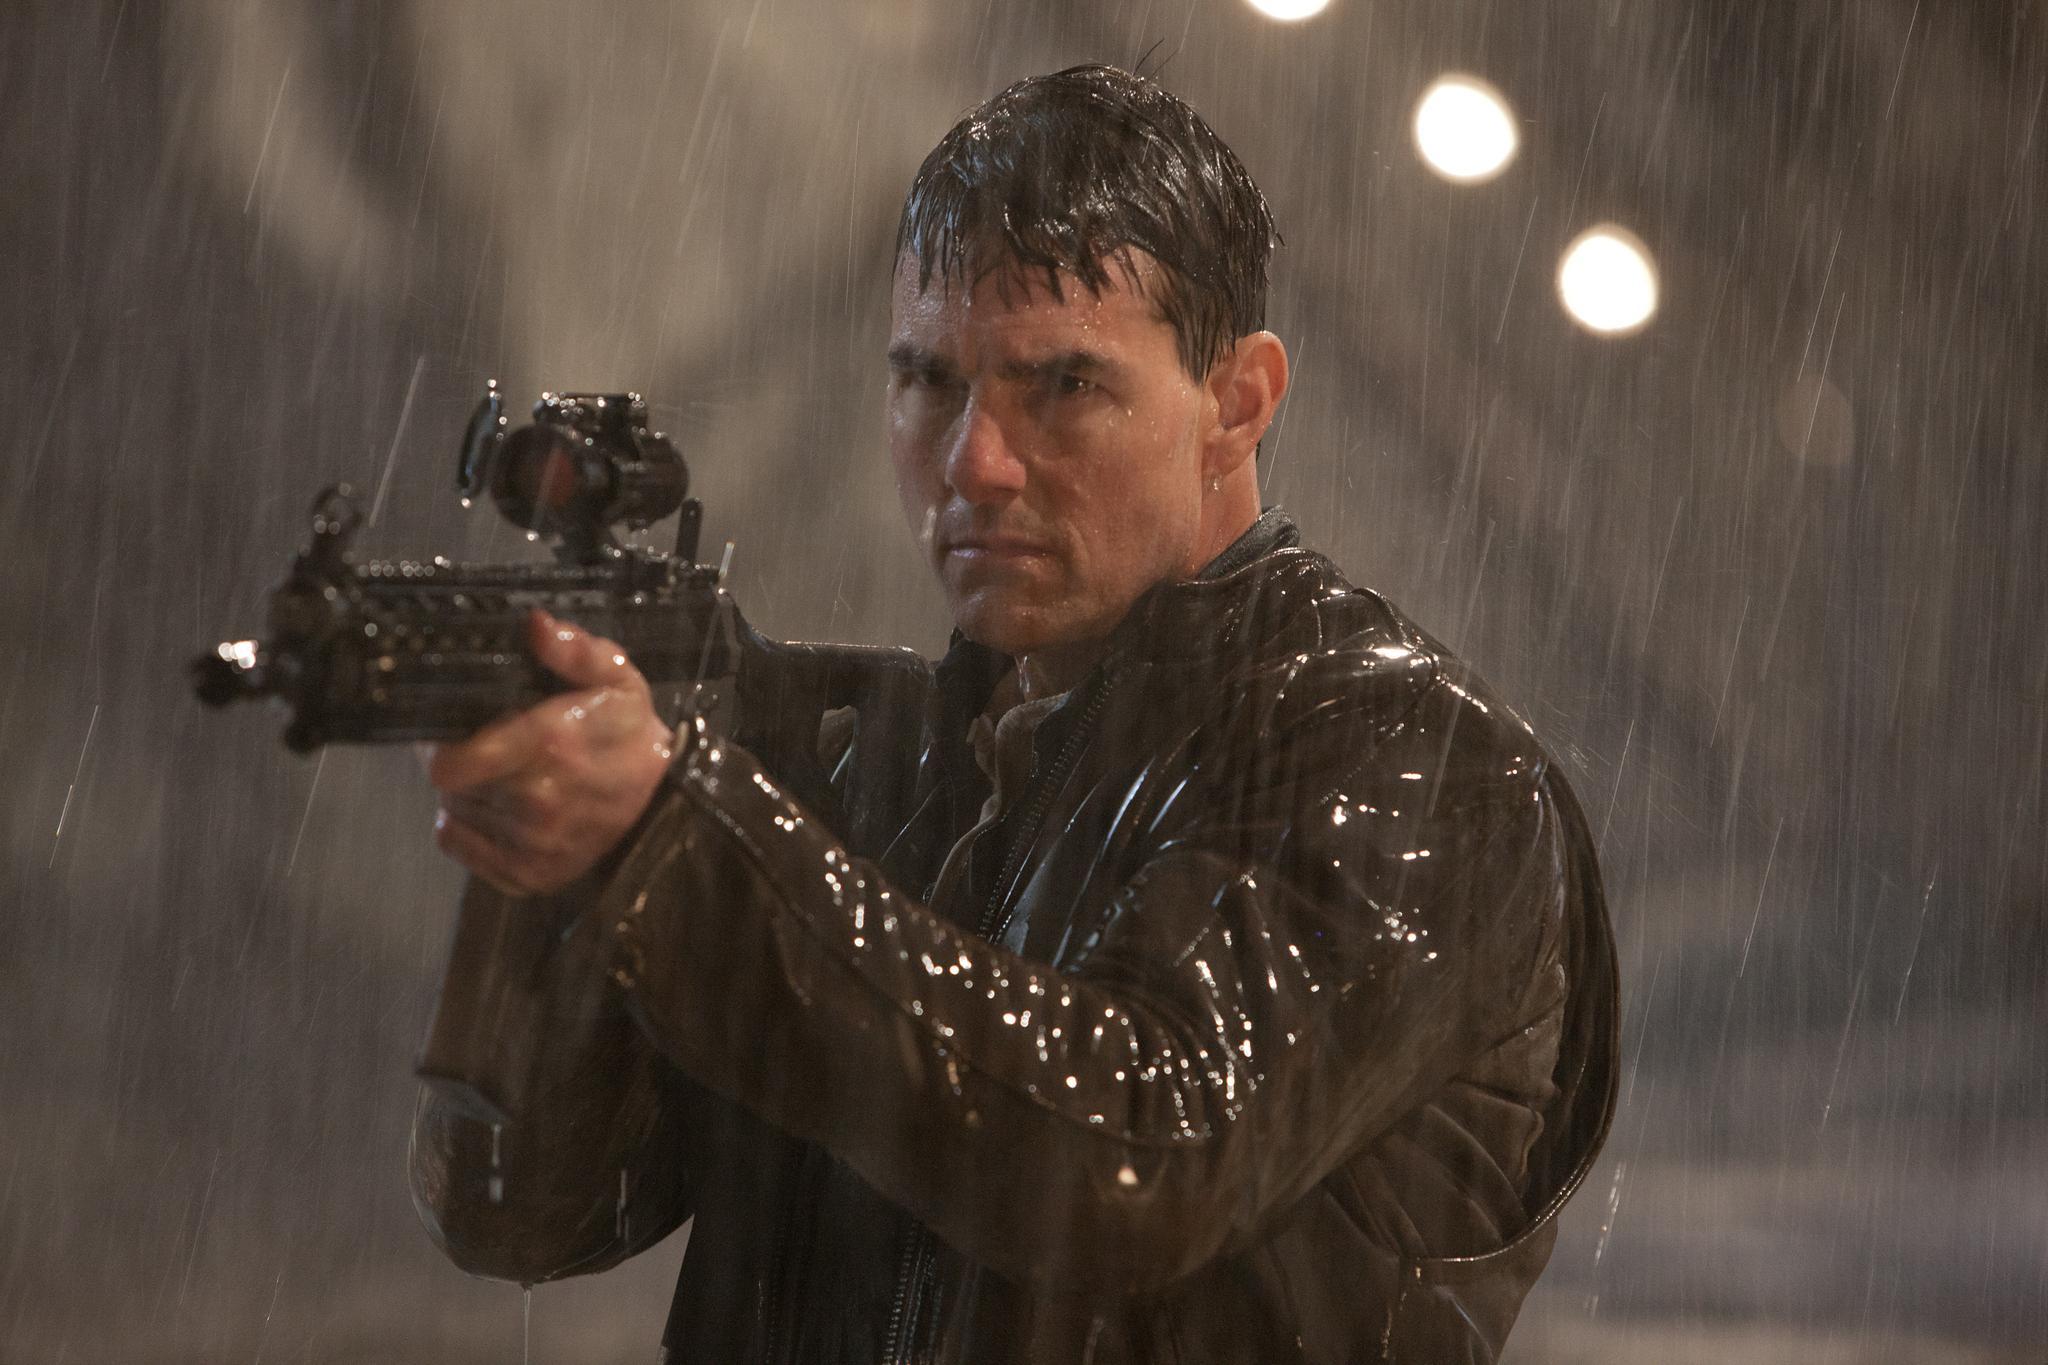 Download 2048x1365 Jack Reacher movies action weapons guns tom cruise wallpaper